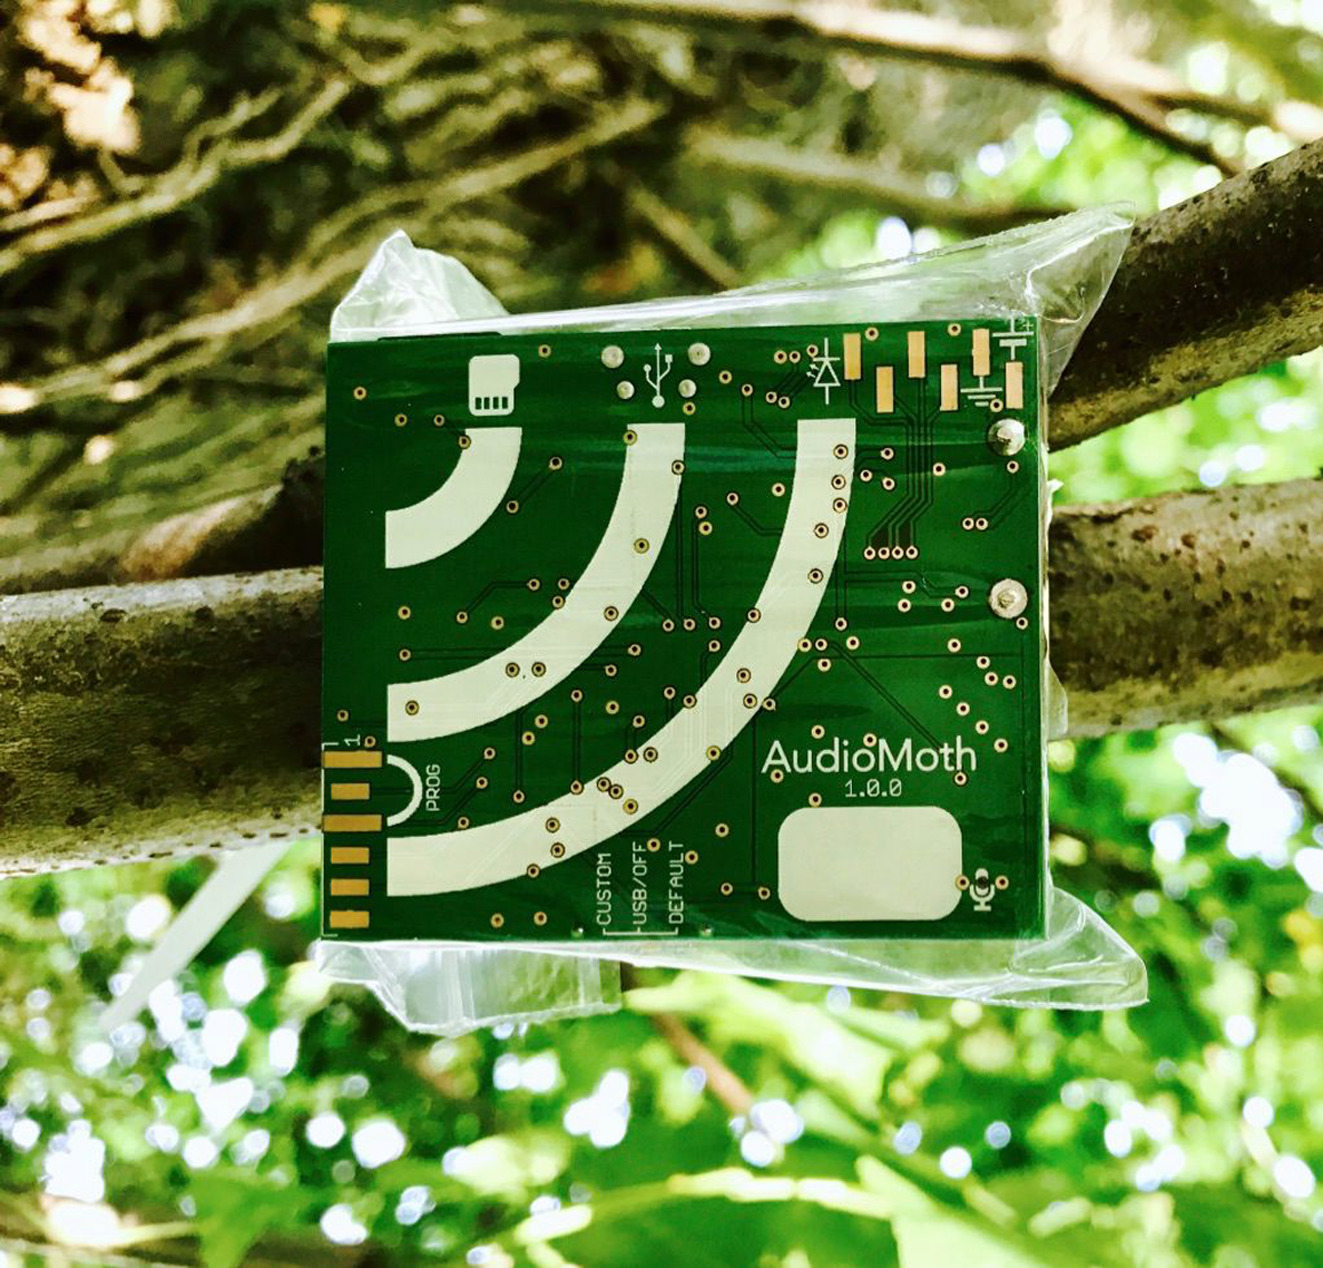 Product photo of the AudioMoth in a tree